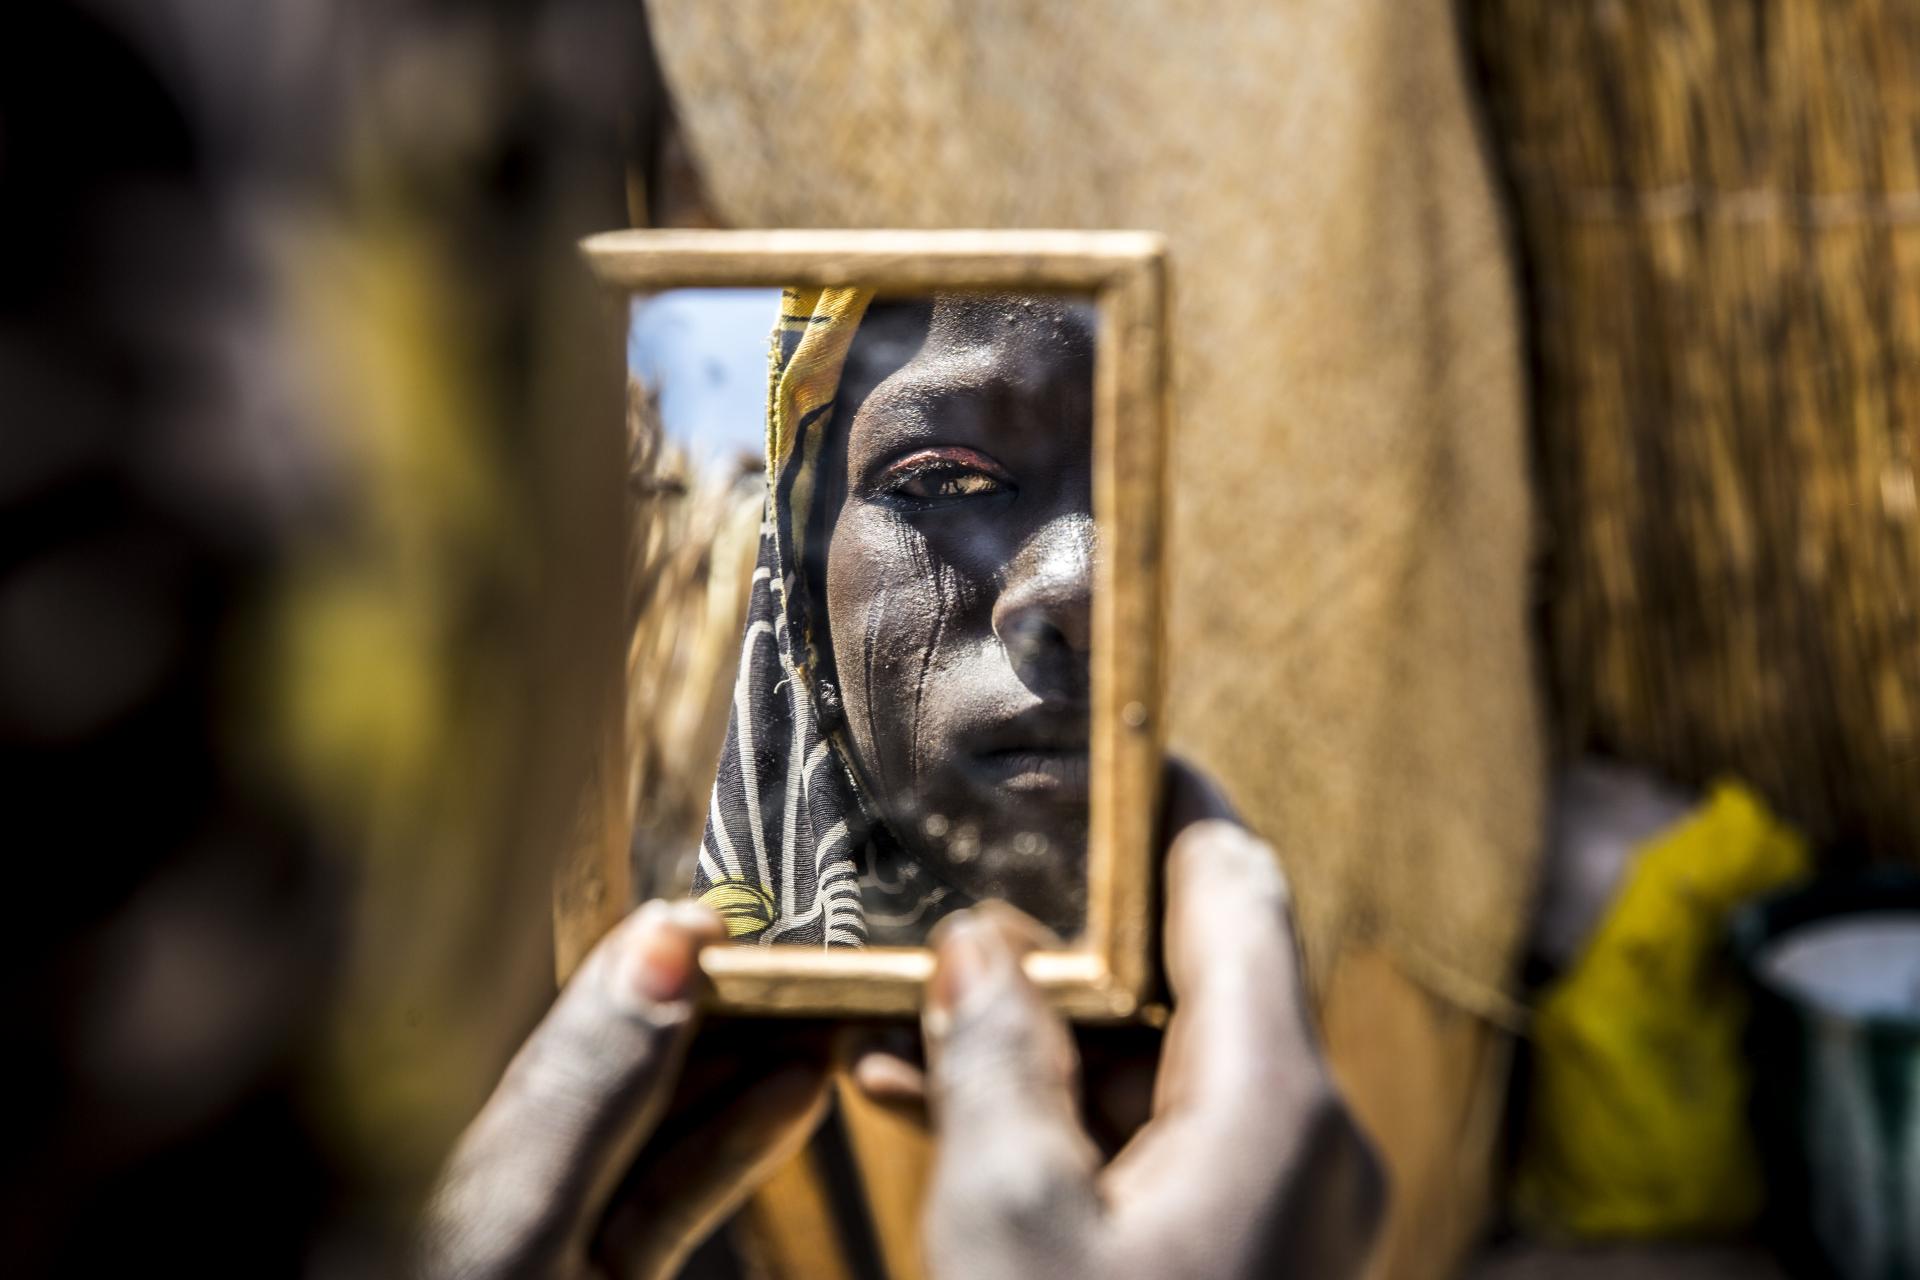 A women starring back at her reflection in a handheld mirror